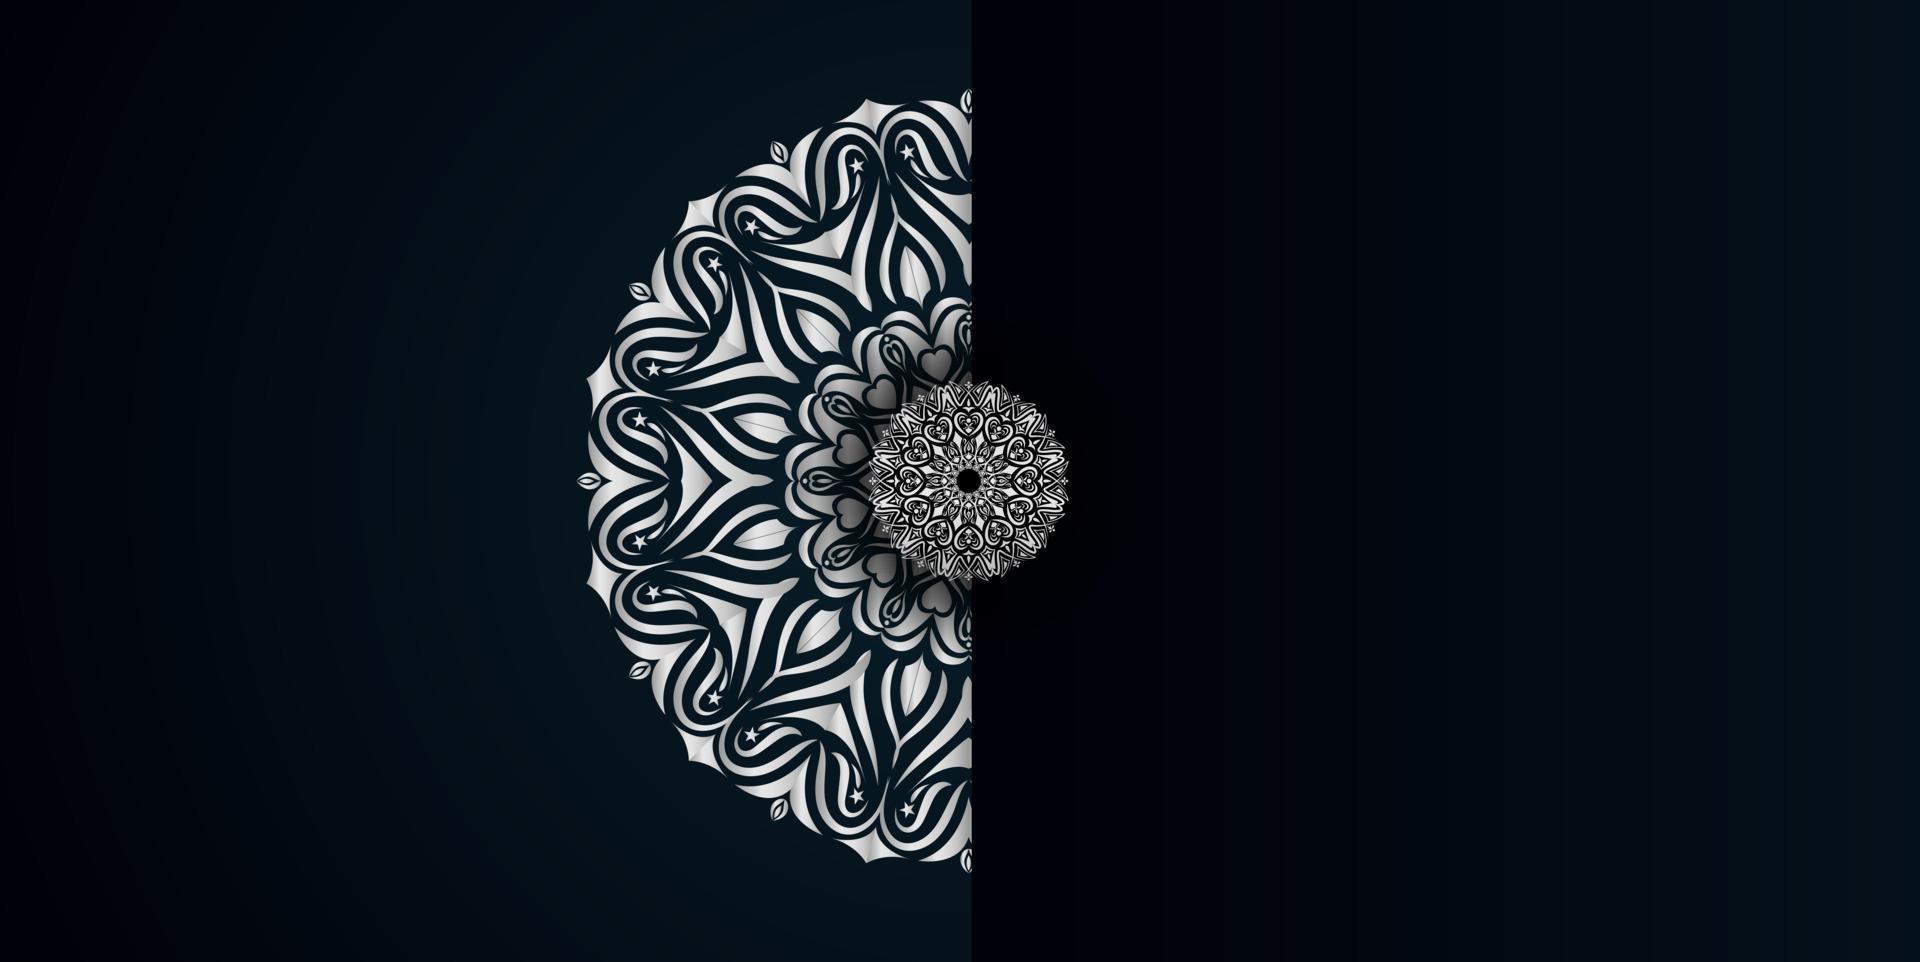 Luxury ornamental mandala design background with silver color vector